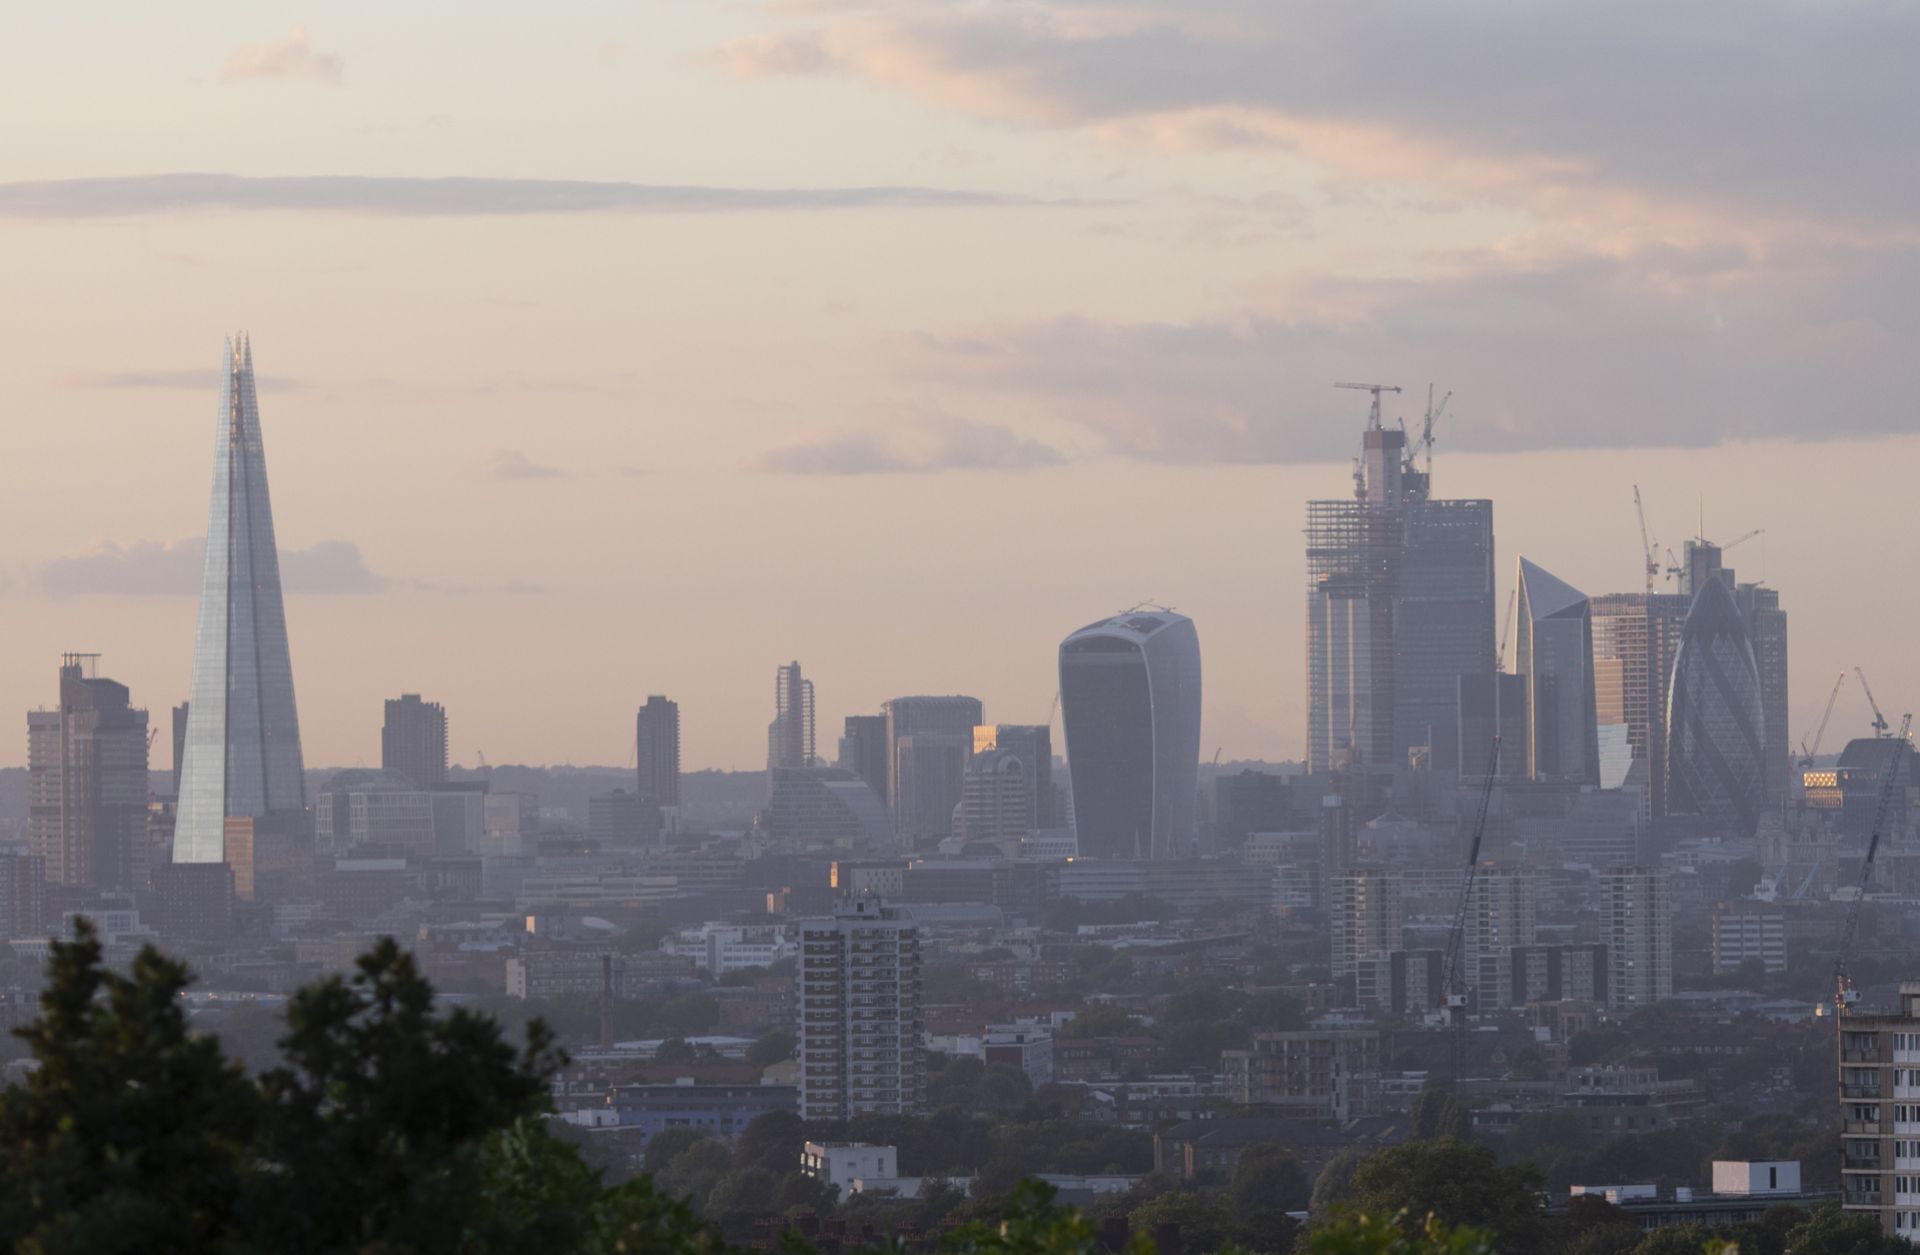 The skyline in London is all aglow as the sun sets on Aug. 16, 2018.